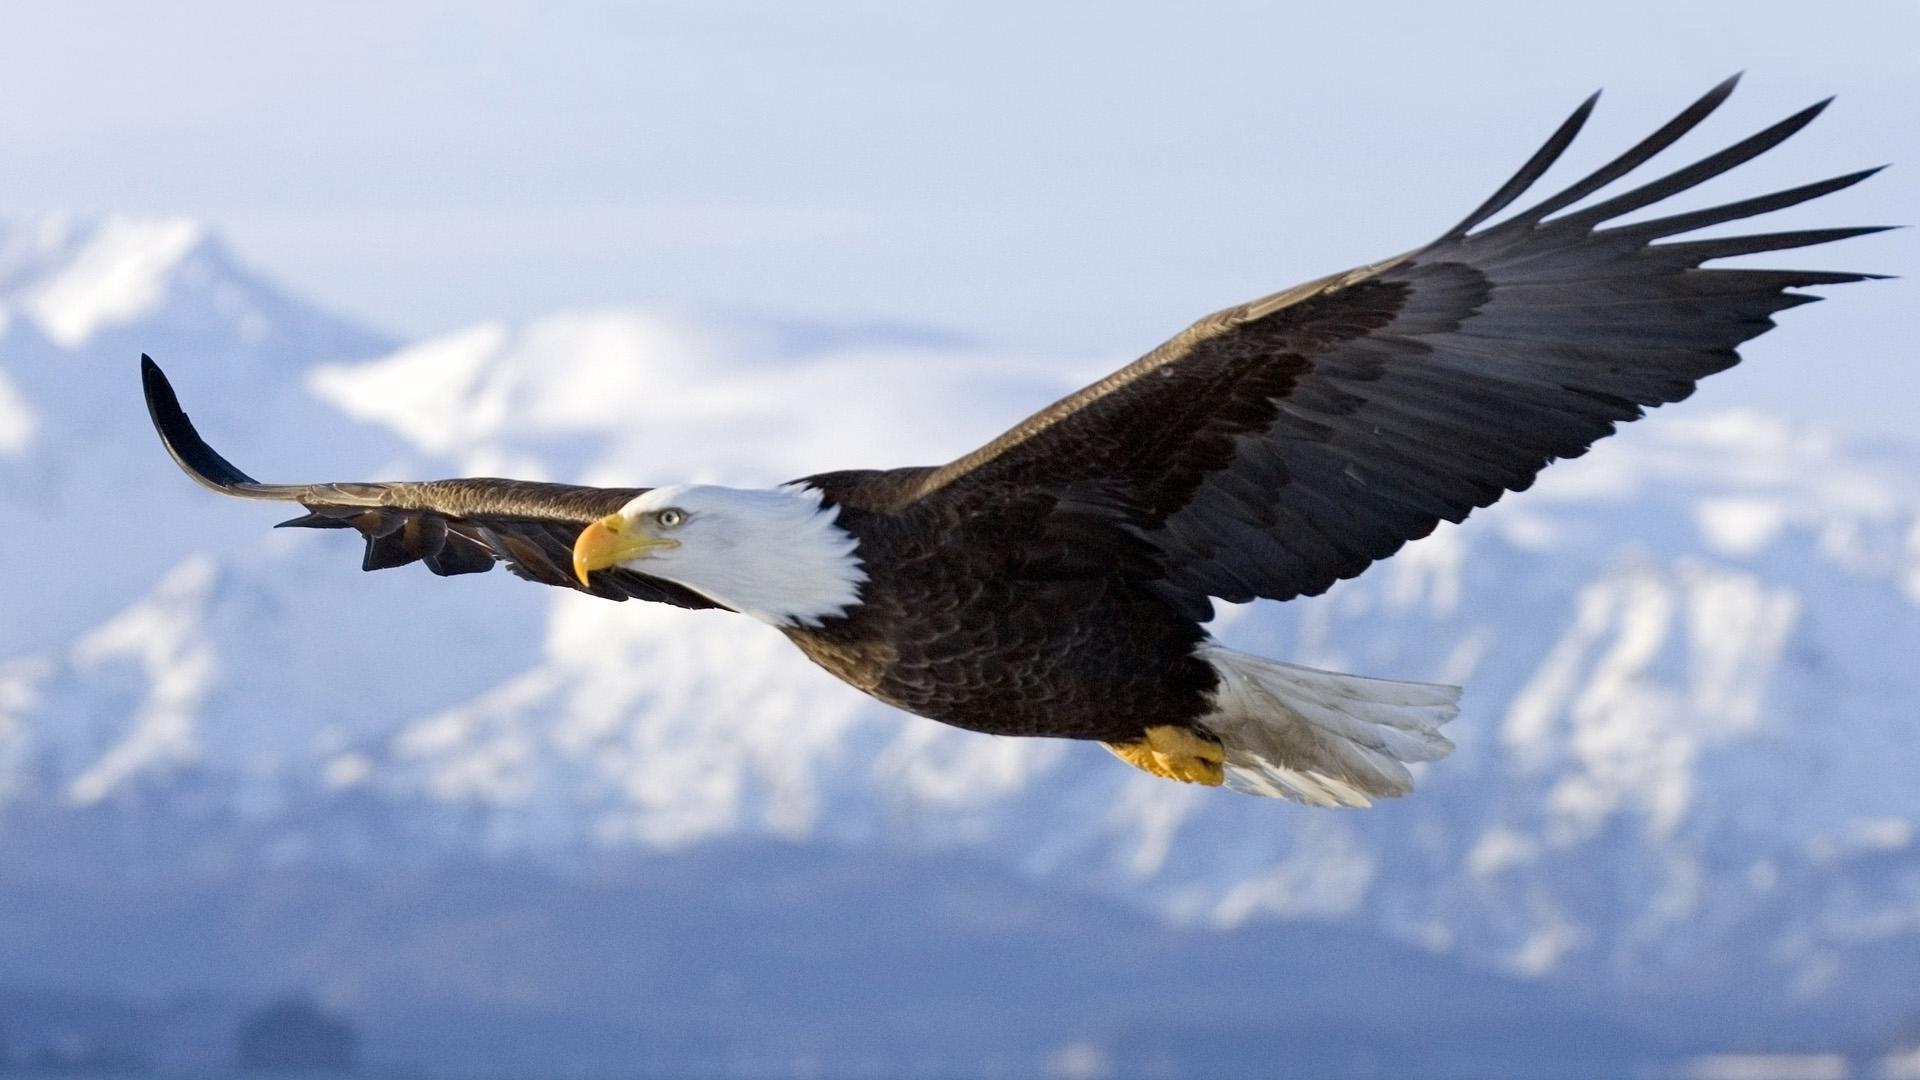 American Eagle Live Wallpaper For Android Apk Download